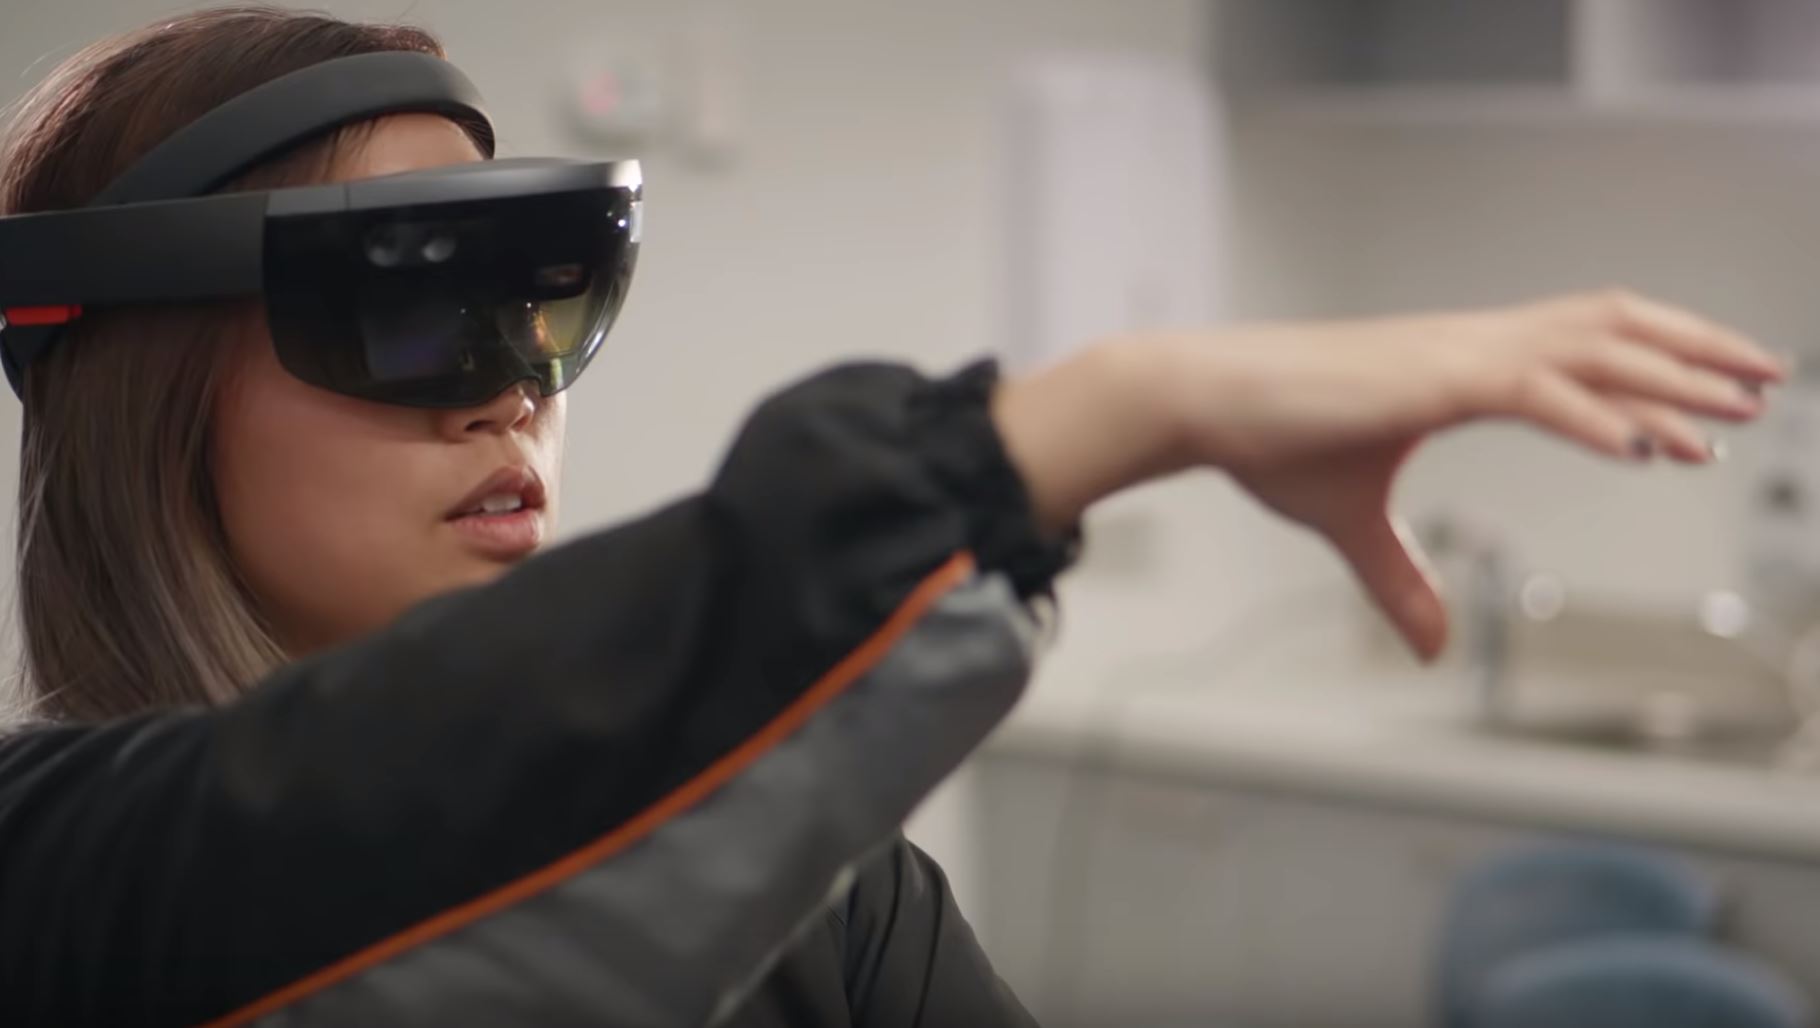 HoloLens allows for students to interact while engaging with digital content